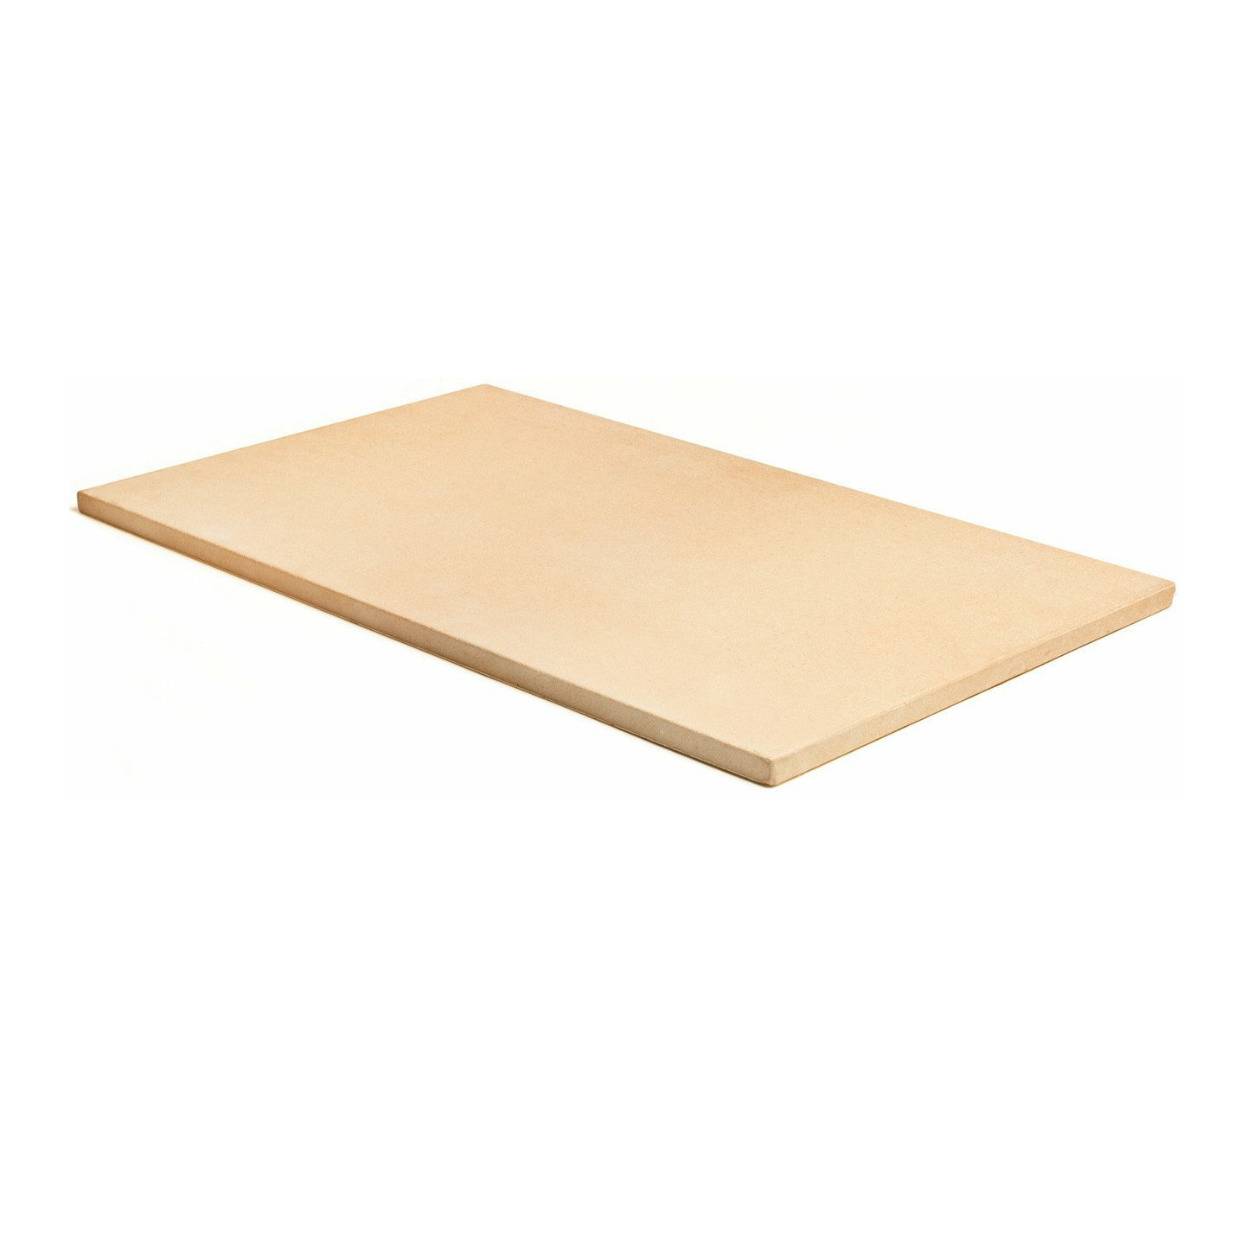 Union Square Group 20-Inch ThermaBond Pizza Stone